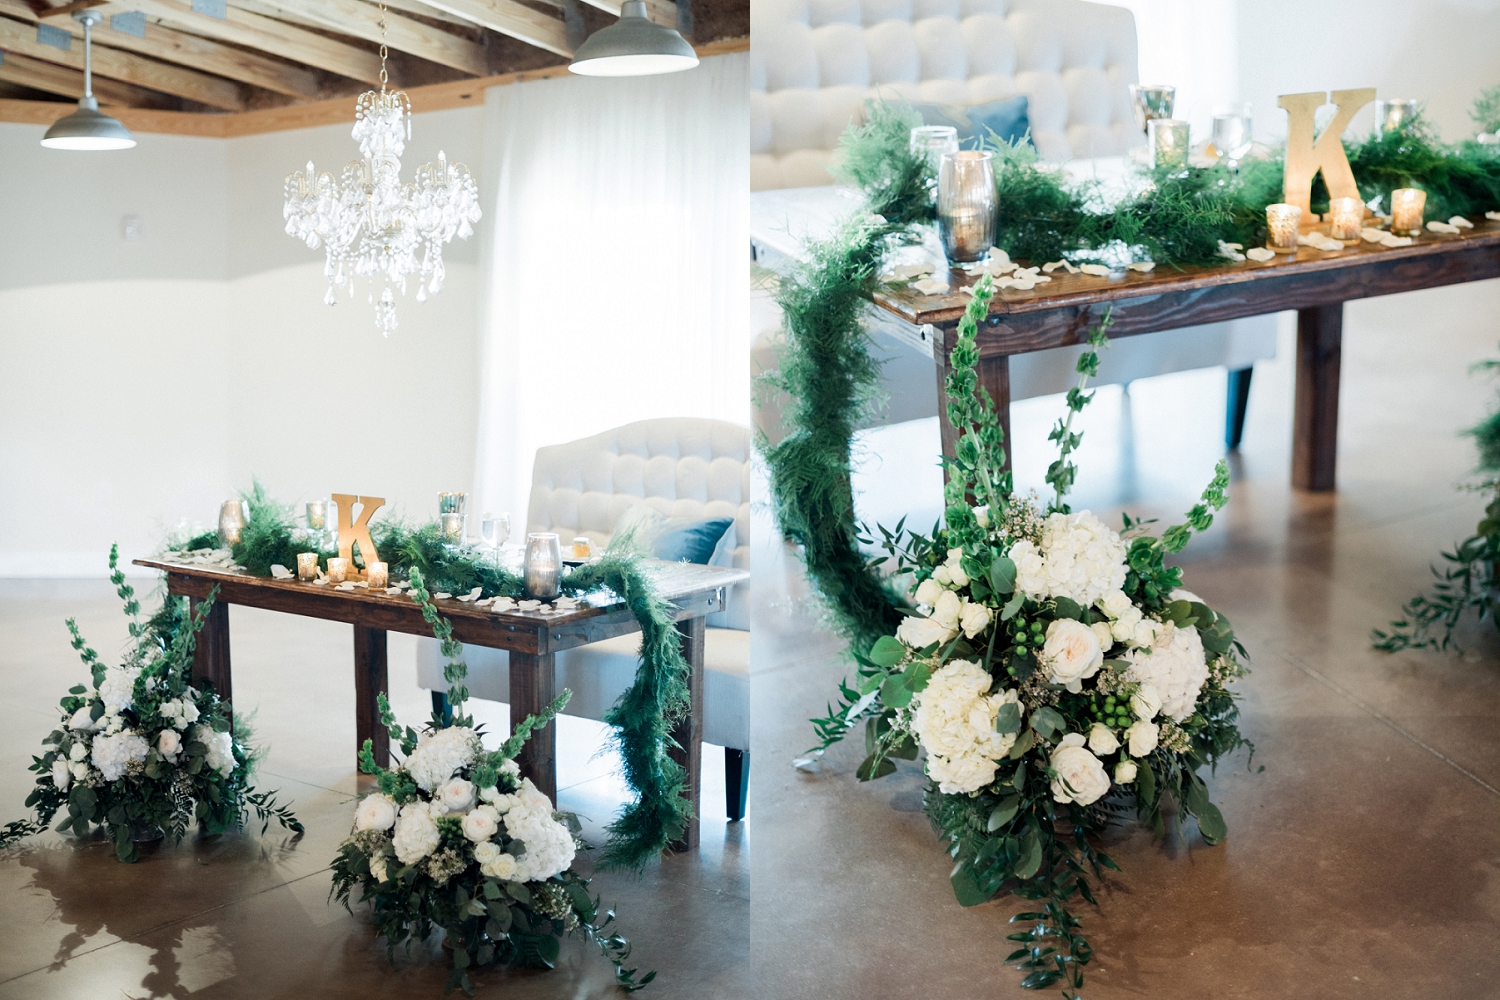 sweethearts table, greenery table decor, wedding tables-cape 